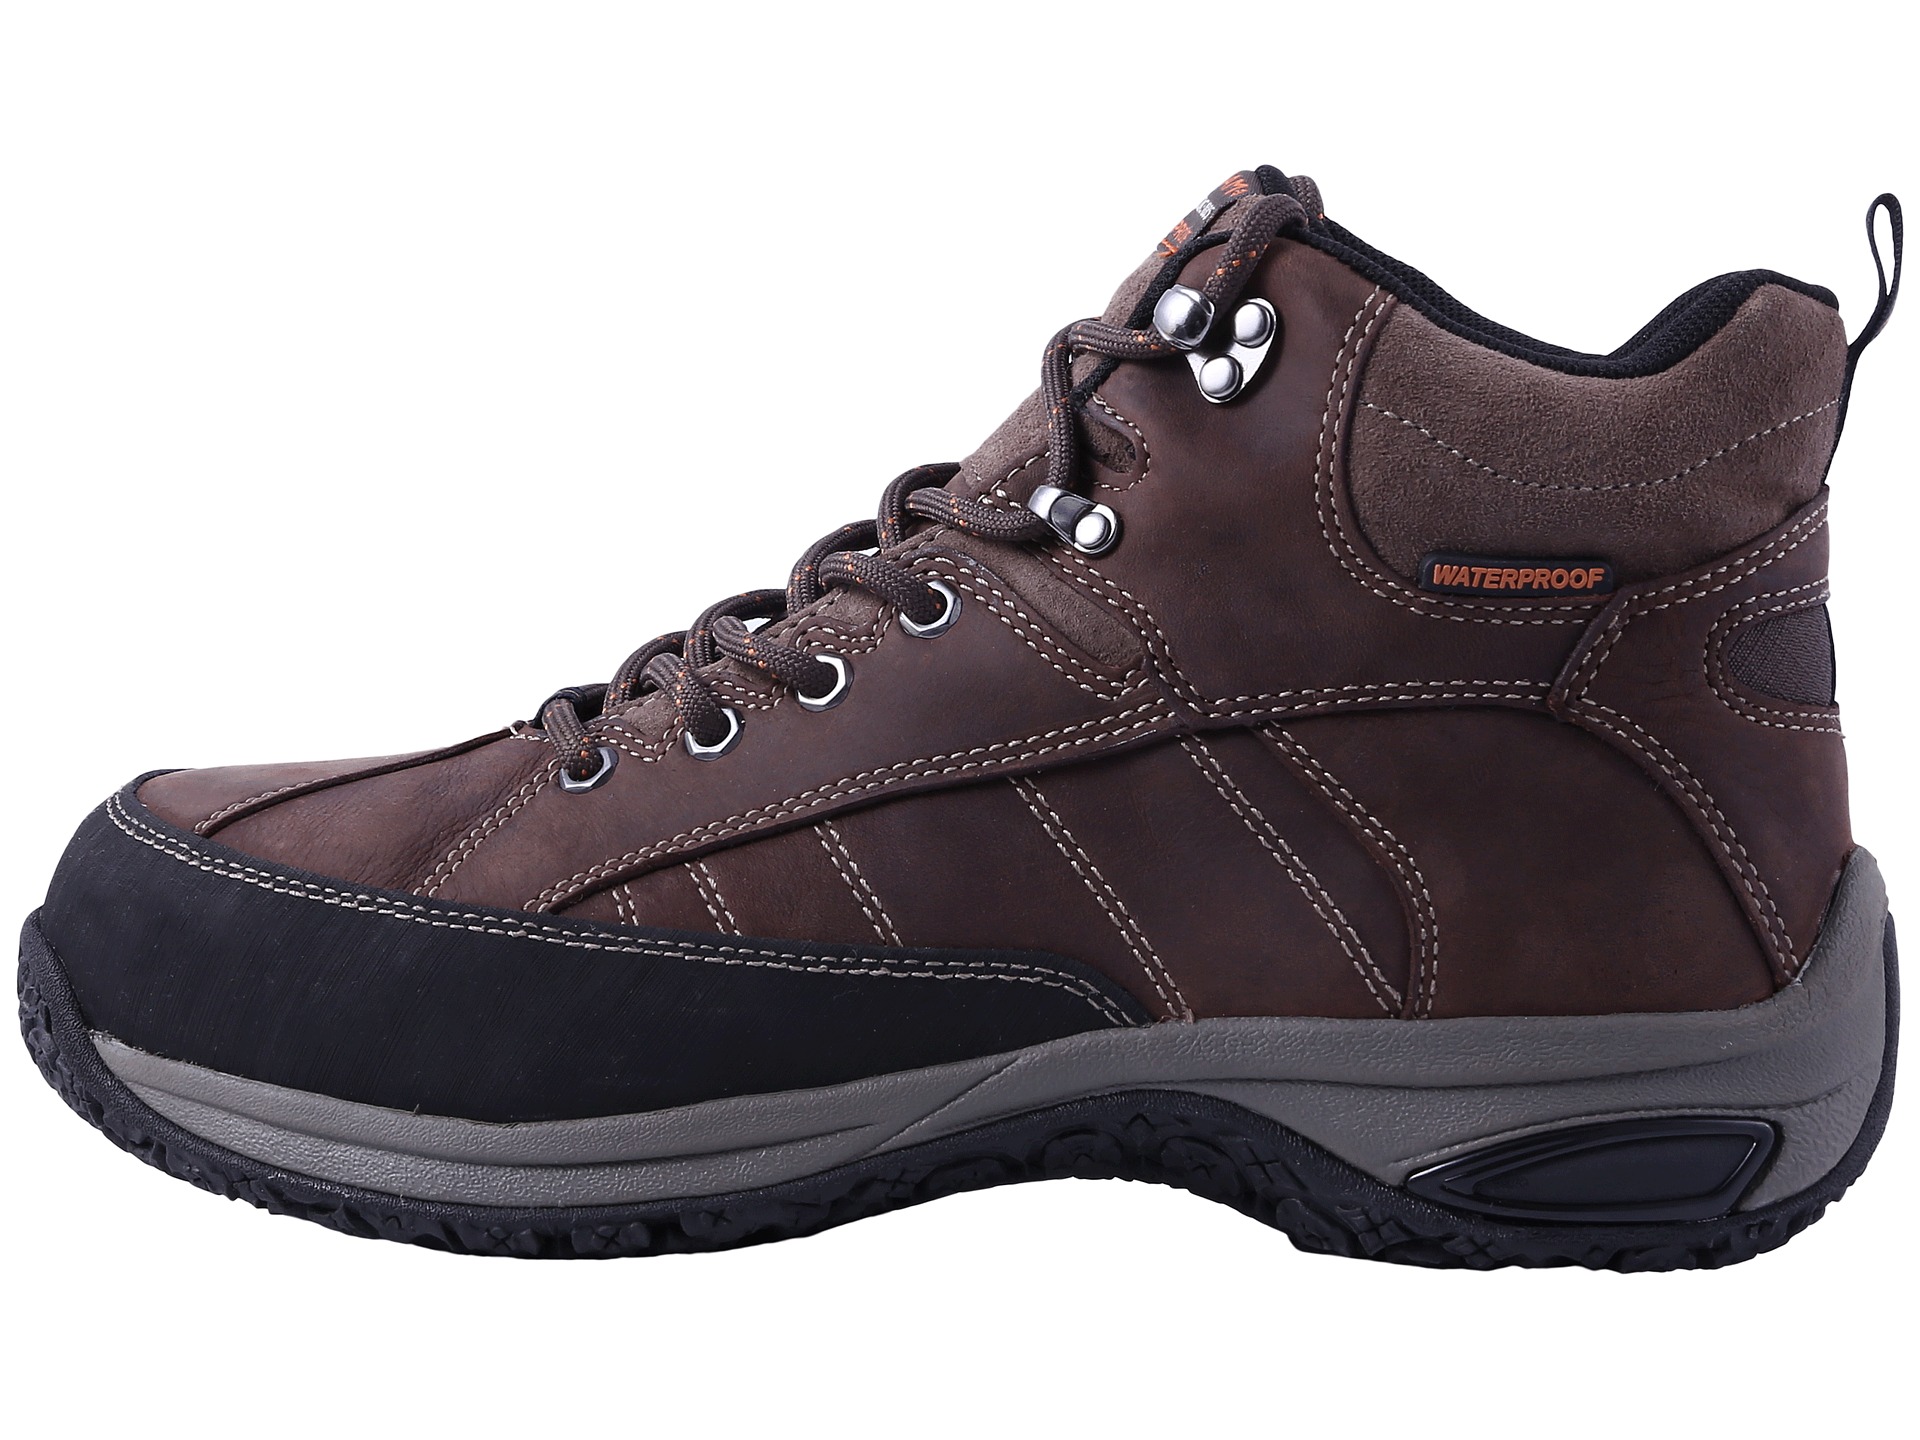 Dunham Lawrence Sport Boot Steel toe at Zappos.com